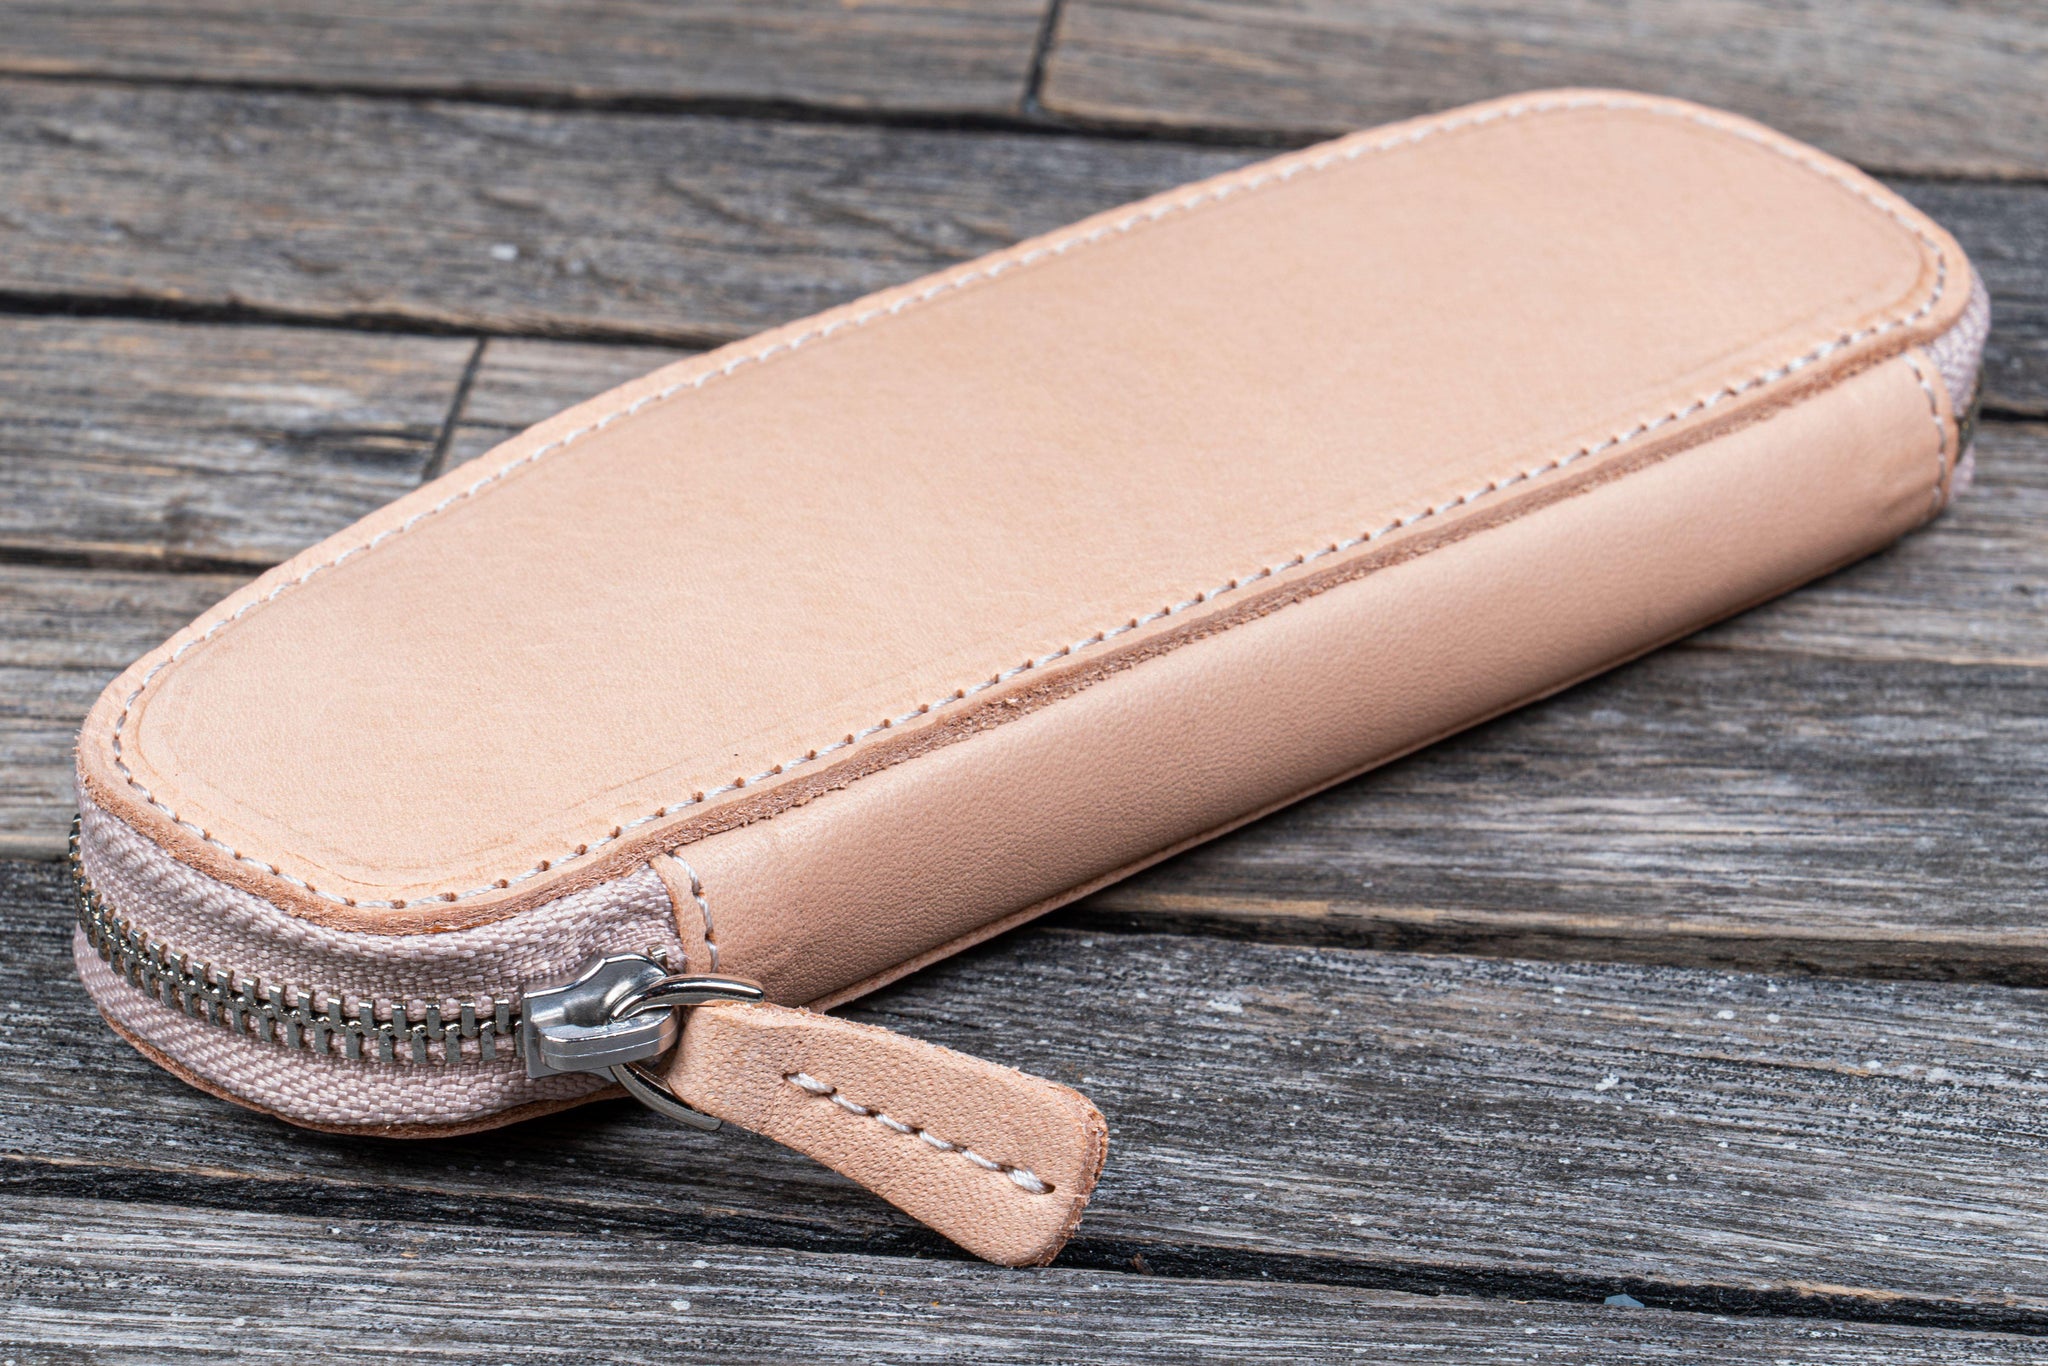 Galen Leather Zippered Duo Slim Pen Case for 2 Pens - Undyed Leather